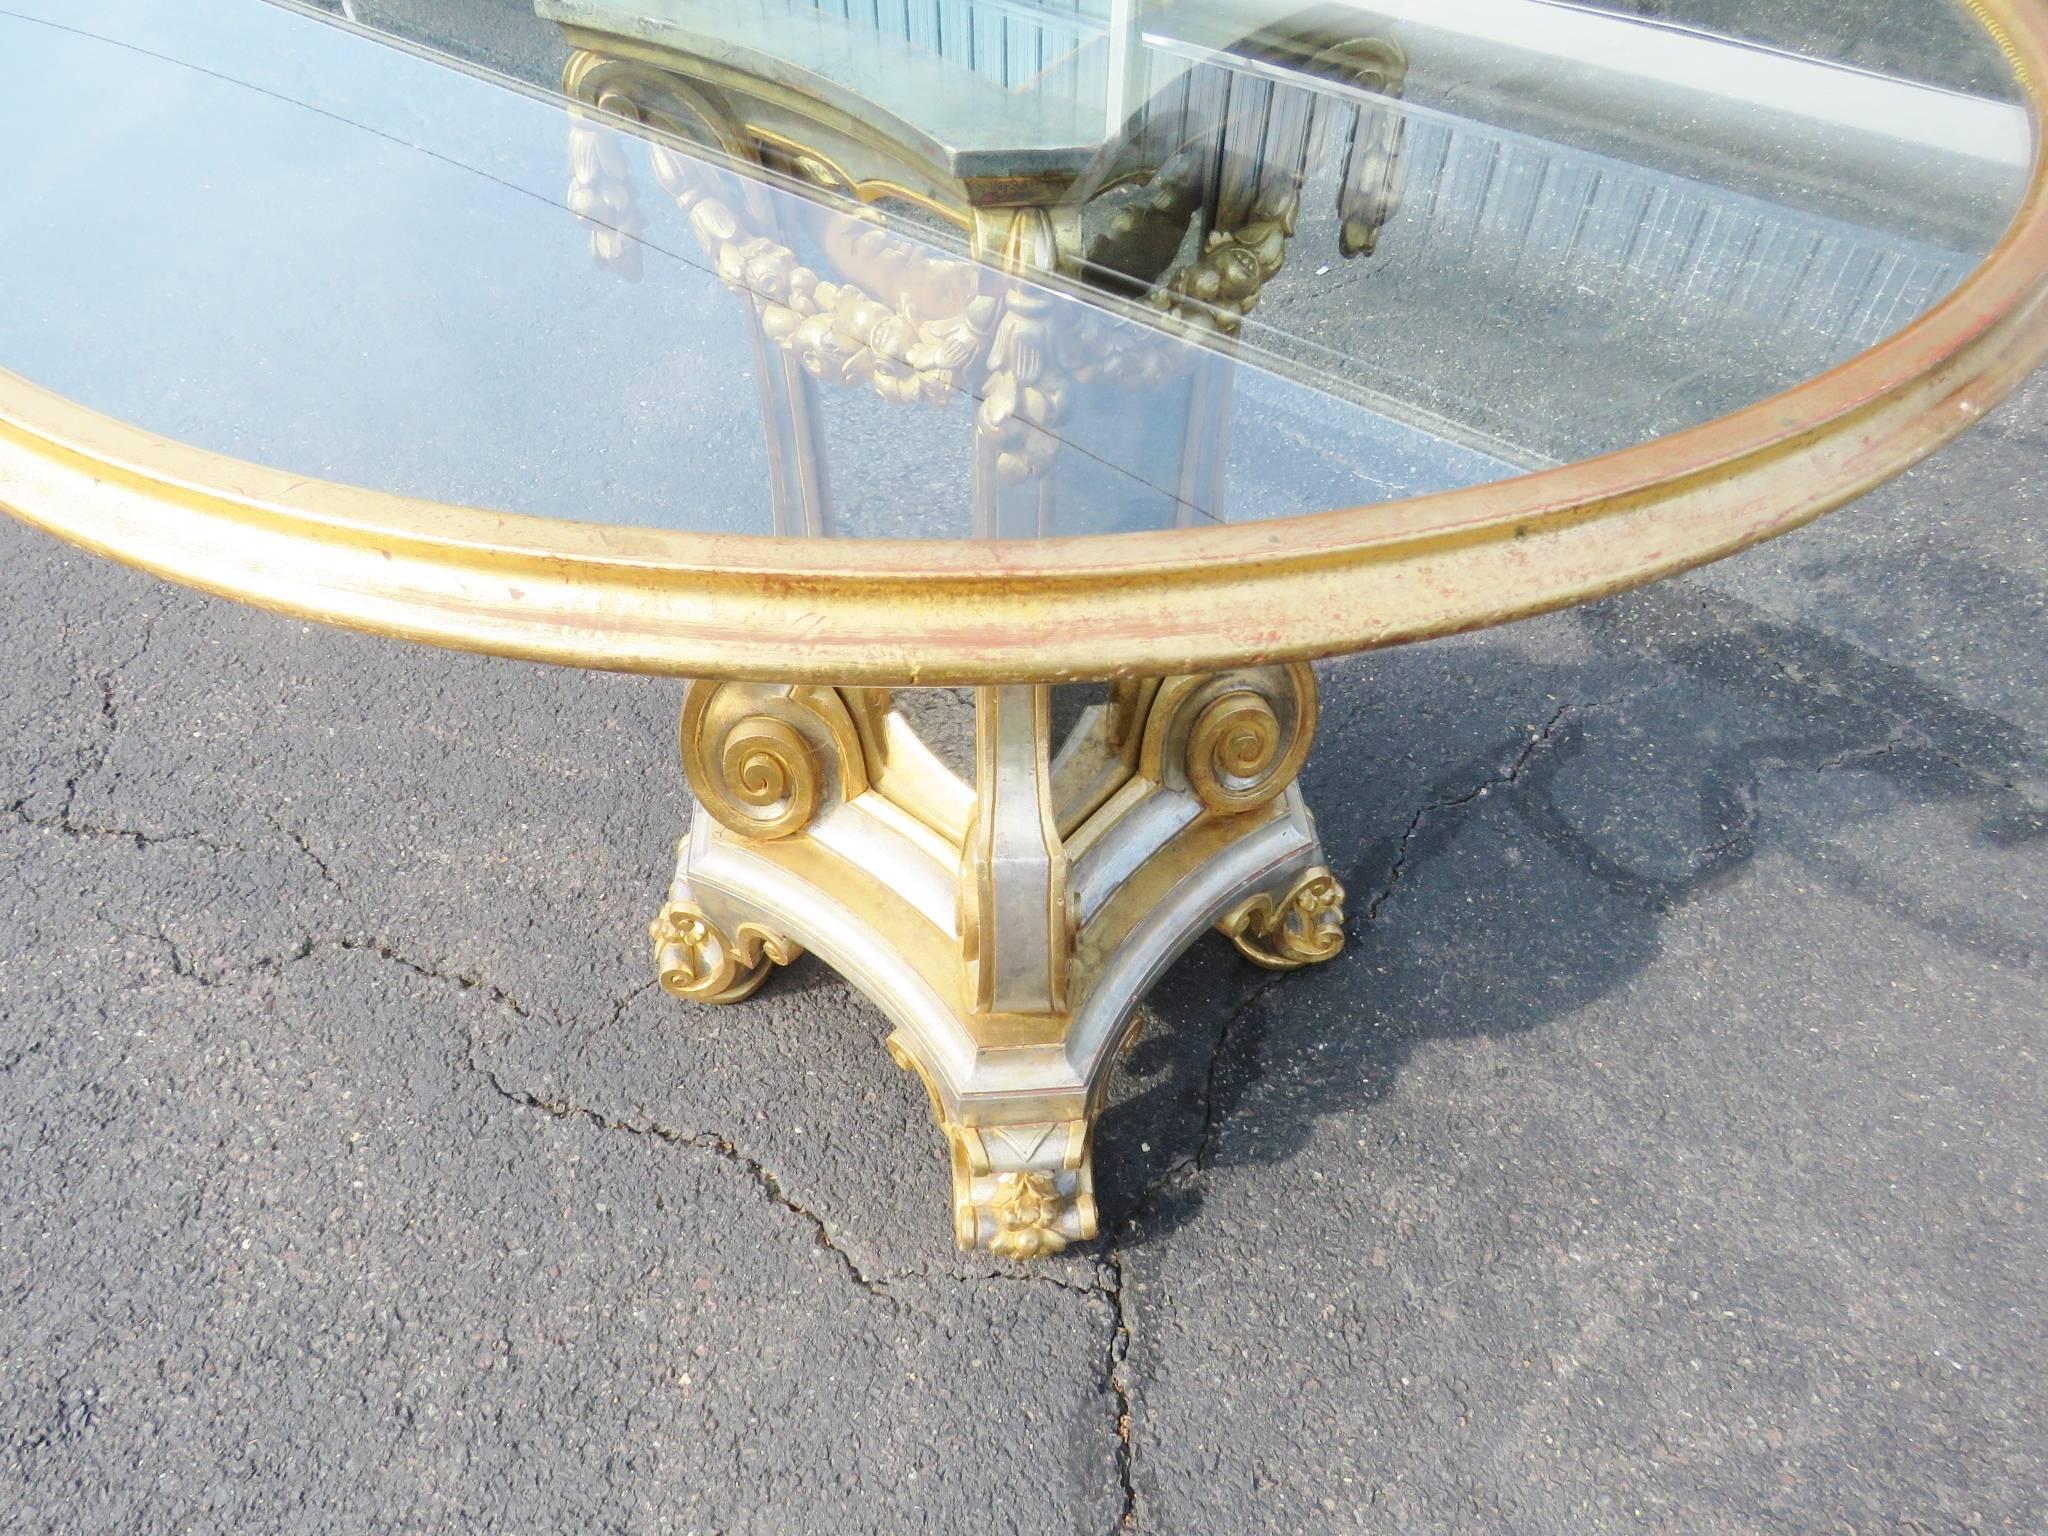 This is a beautiful table. Featuring Silver and gold leaf finish and mirrored panels, This table will reflect not only your excellent taste in furniture but the rest of the surrounding areas of your home. The table is opulent and extremely